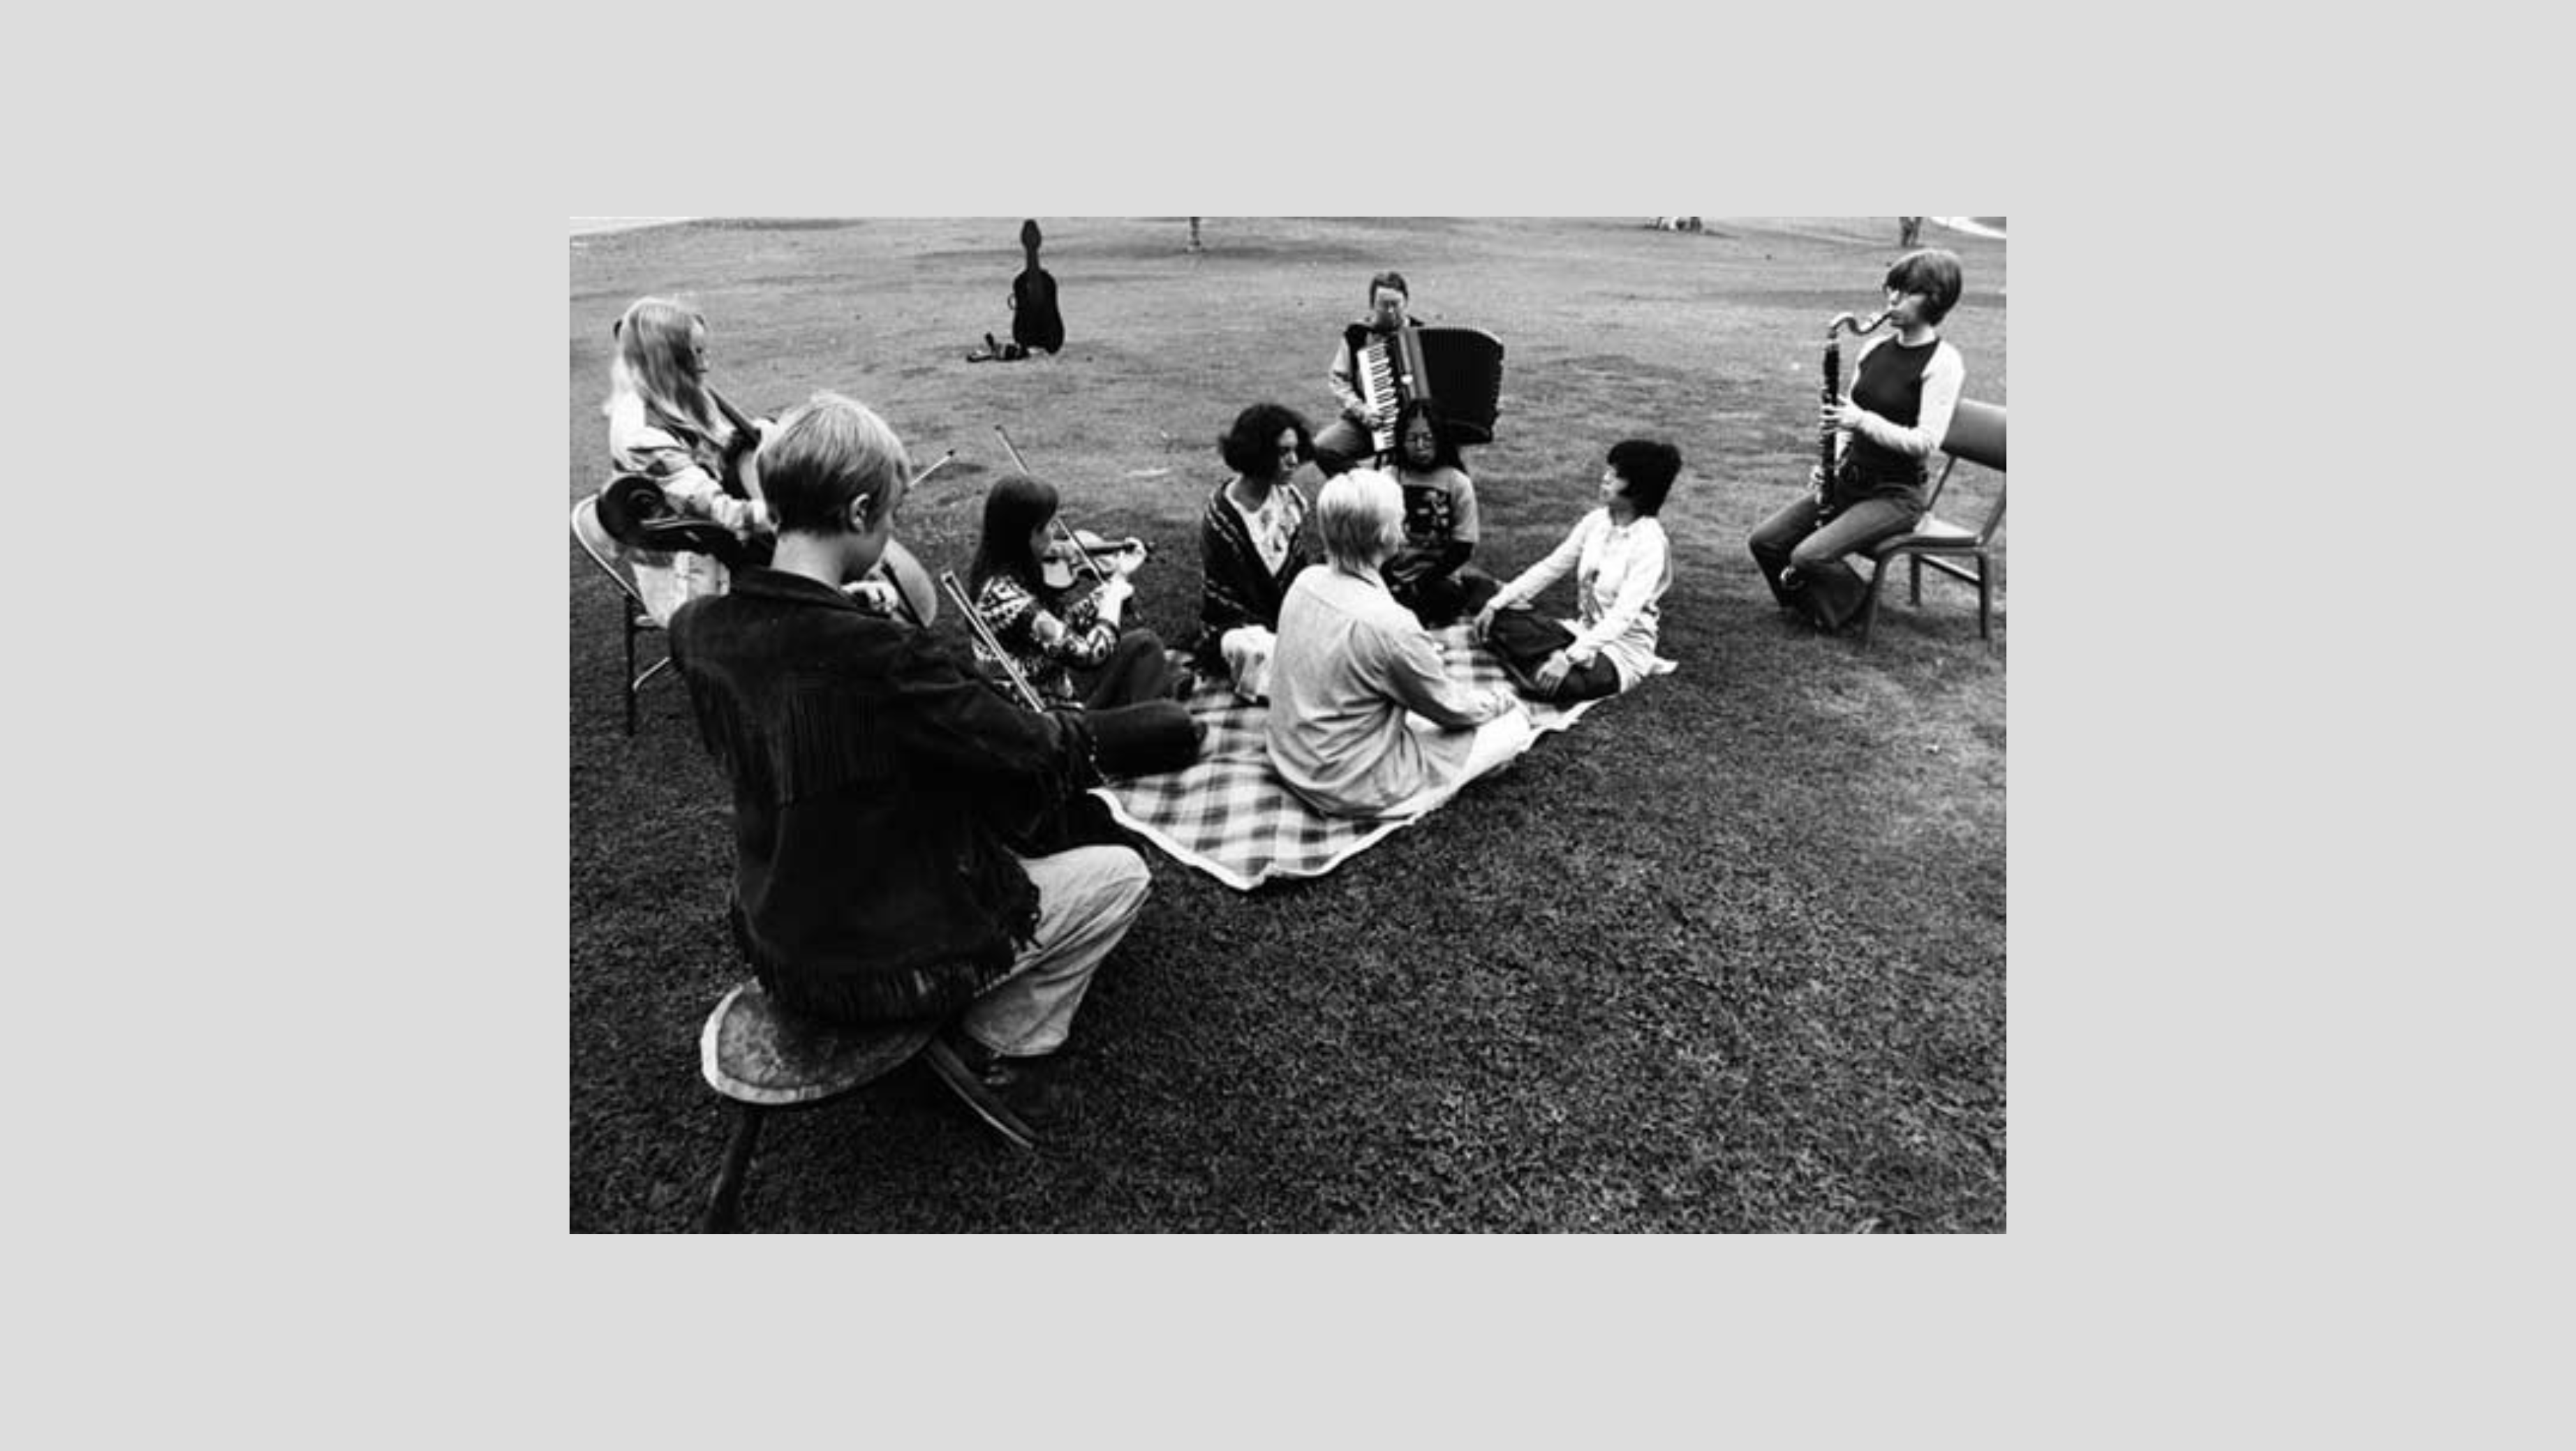 Pauline Oliveros and the ♀ Ensemble performing Teach Yourself to Fly from Sonic Meditations, 1970, Rancho Santa Fe, CA, (foreground to the left around: Lin Barron, cello, Lynn Lonidier, cello, Pauline Oliveros, accordion, Joan George, bass clarinet. Center seated foreground to the left around voices: Chris Voigt, Shirley Wong, Bonnie Barnett and Betty Wong). Pauline Oliveros Papers. MSS 102. Mandeville Special Collections Library, University of California, San Diego.